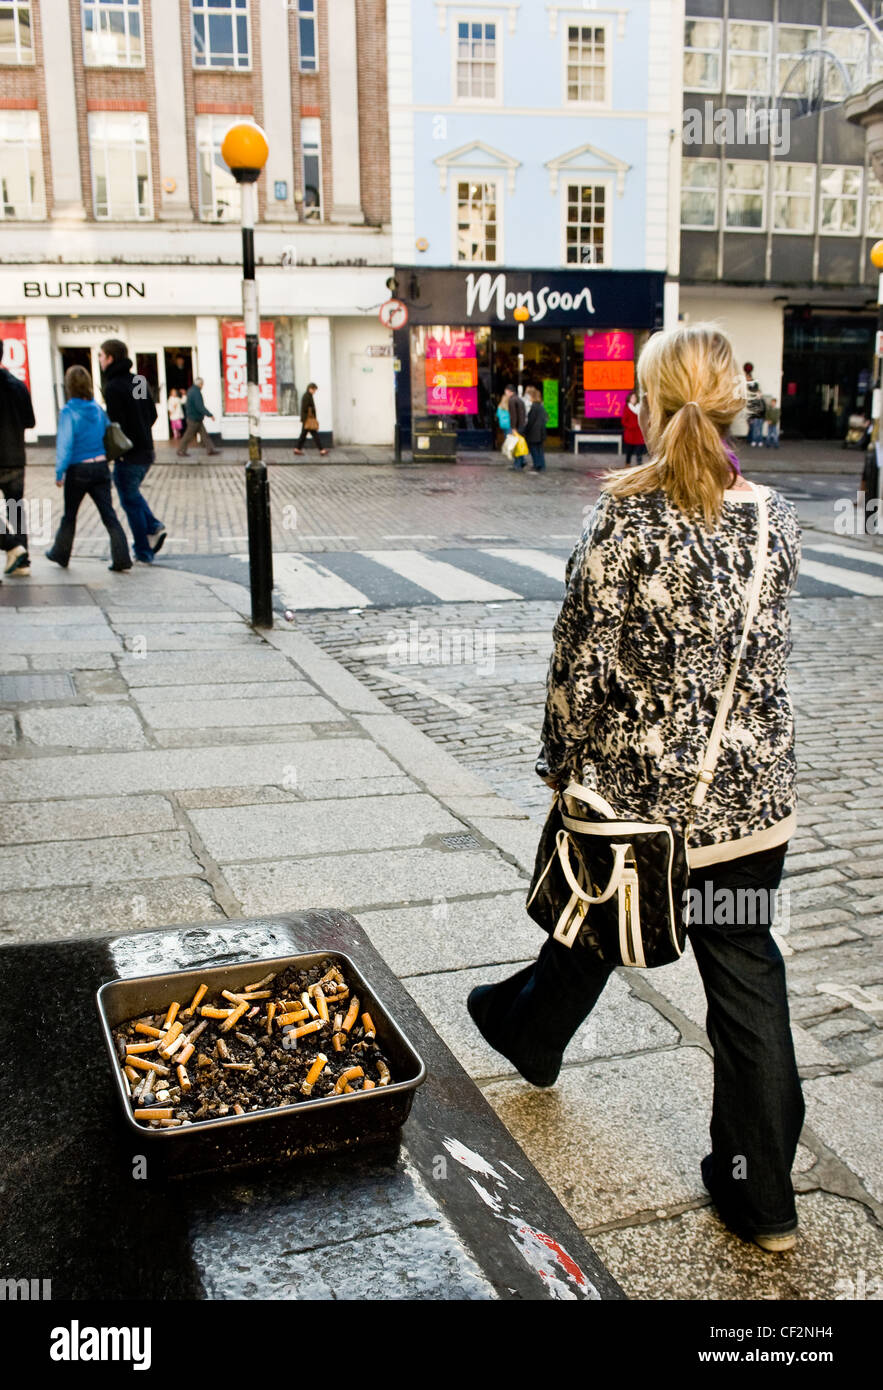 A woman walking past an ashtray full of cigarette butts in a street in Truro. Stock Photo